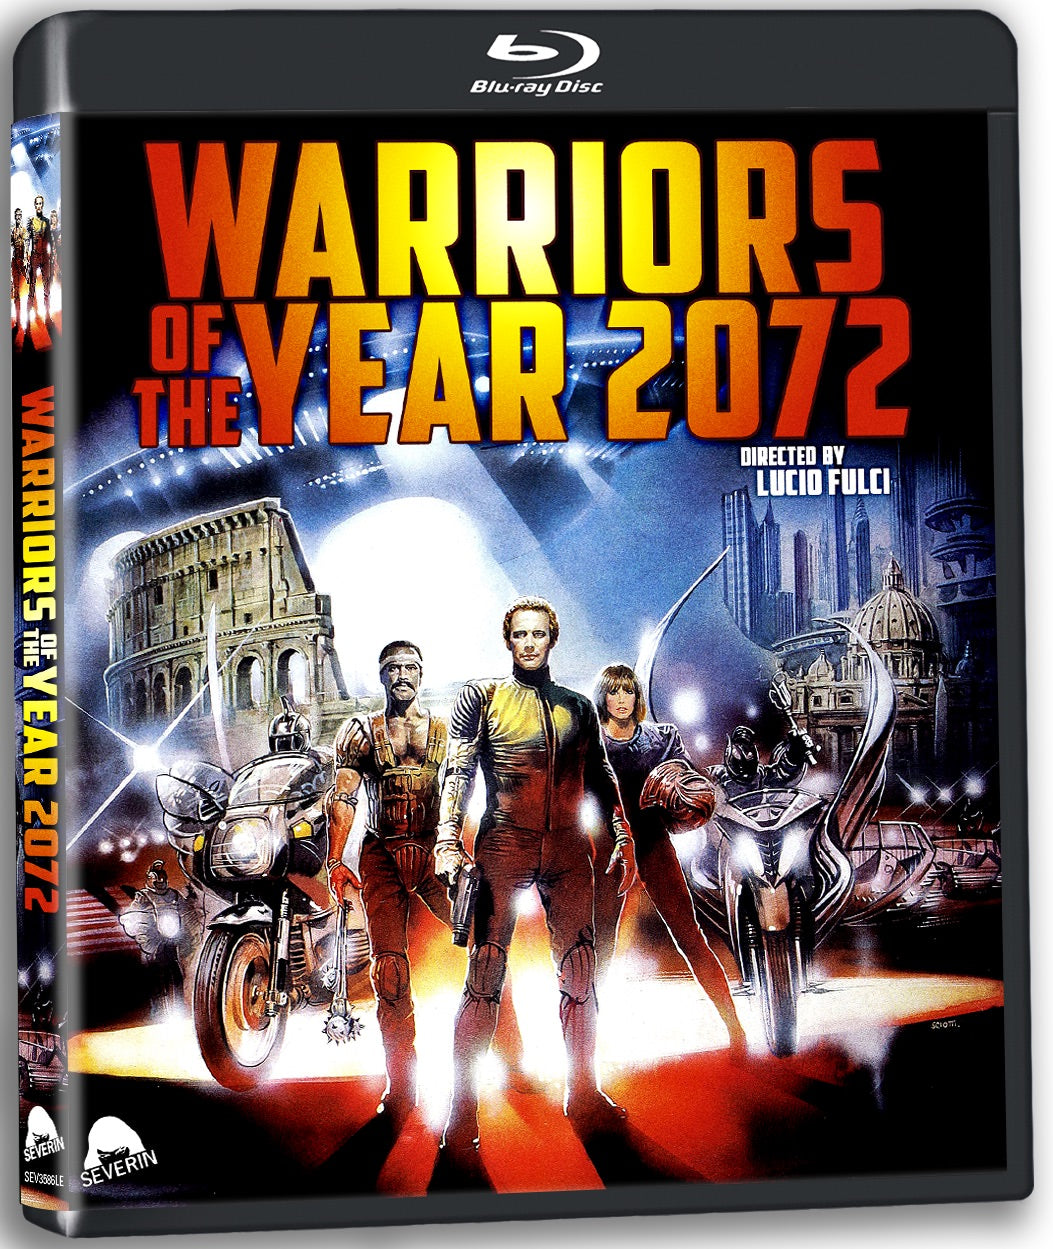 Warriors of the Year 2072 [2-Disc Blu-ray]